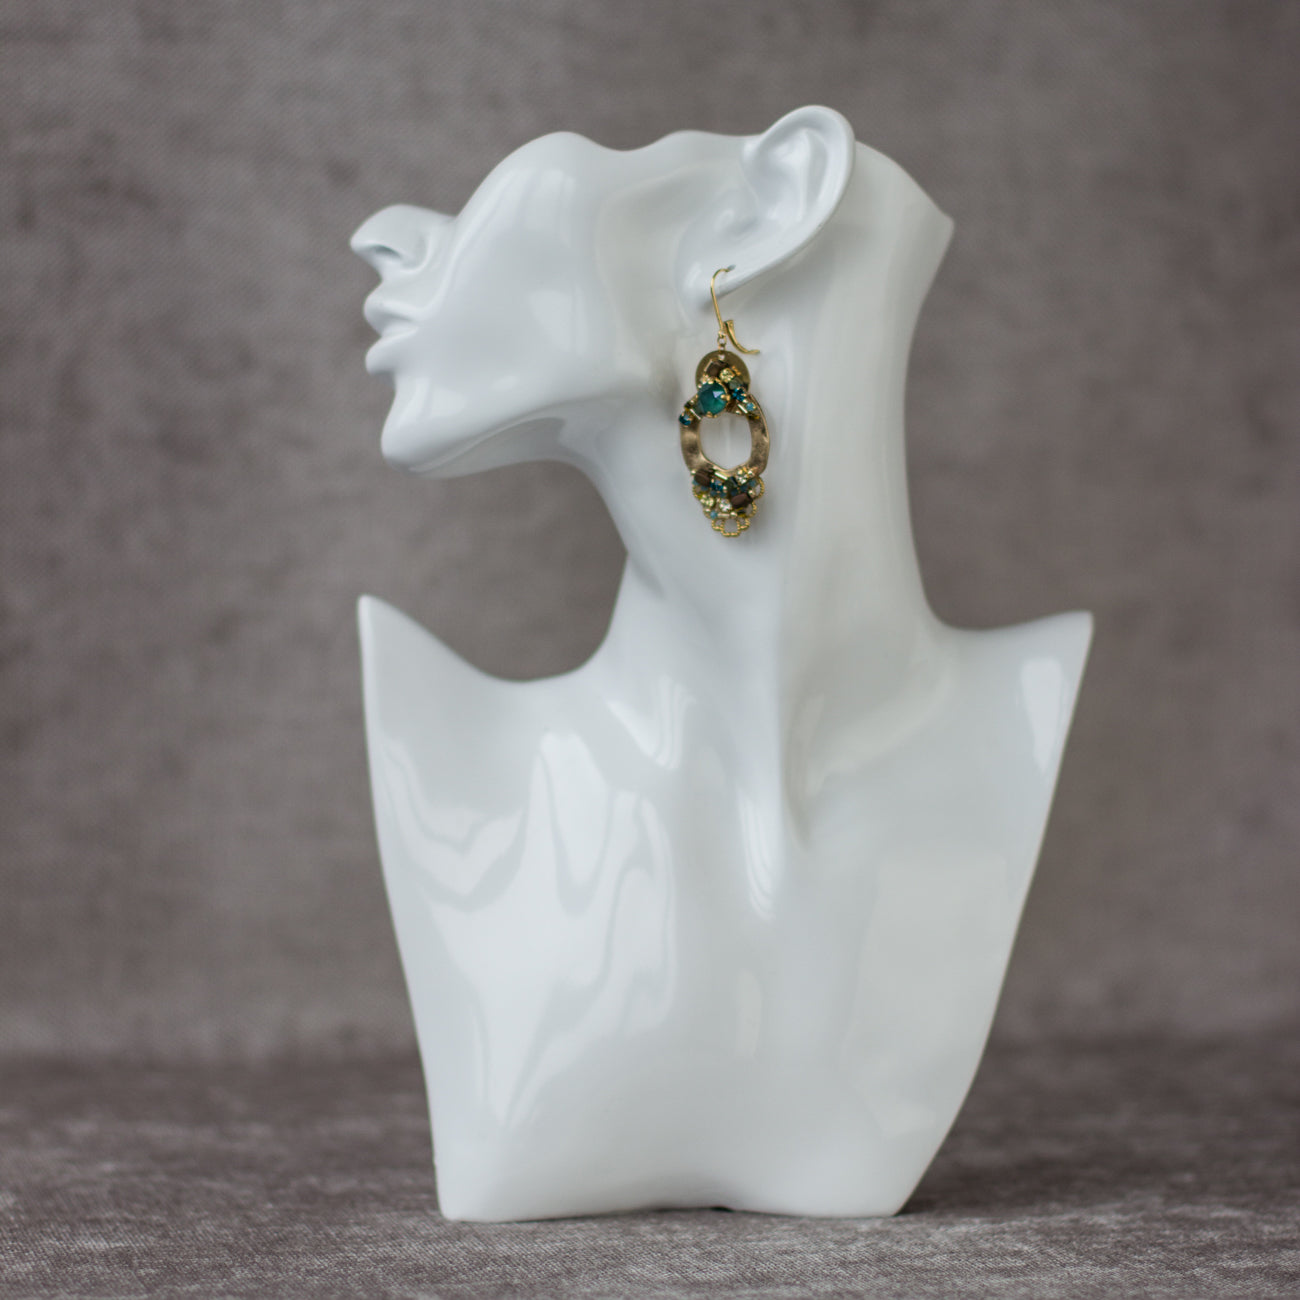 Shop women's jewelry at LeFlowers Bijouterie to discover unique handmade pieces for your wardrobe. Chic asymmetrical earrings. Gold/green evening earrings. Woman jewelry. Crystal earrings. Rhinestone jewelry.